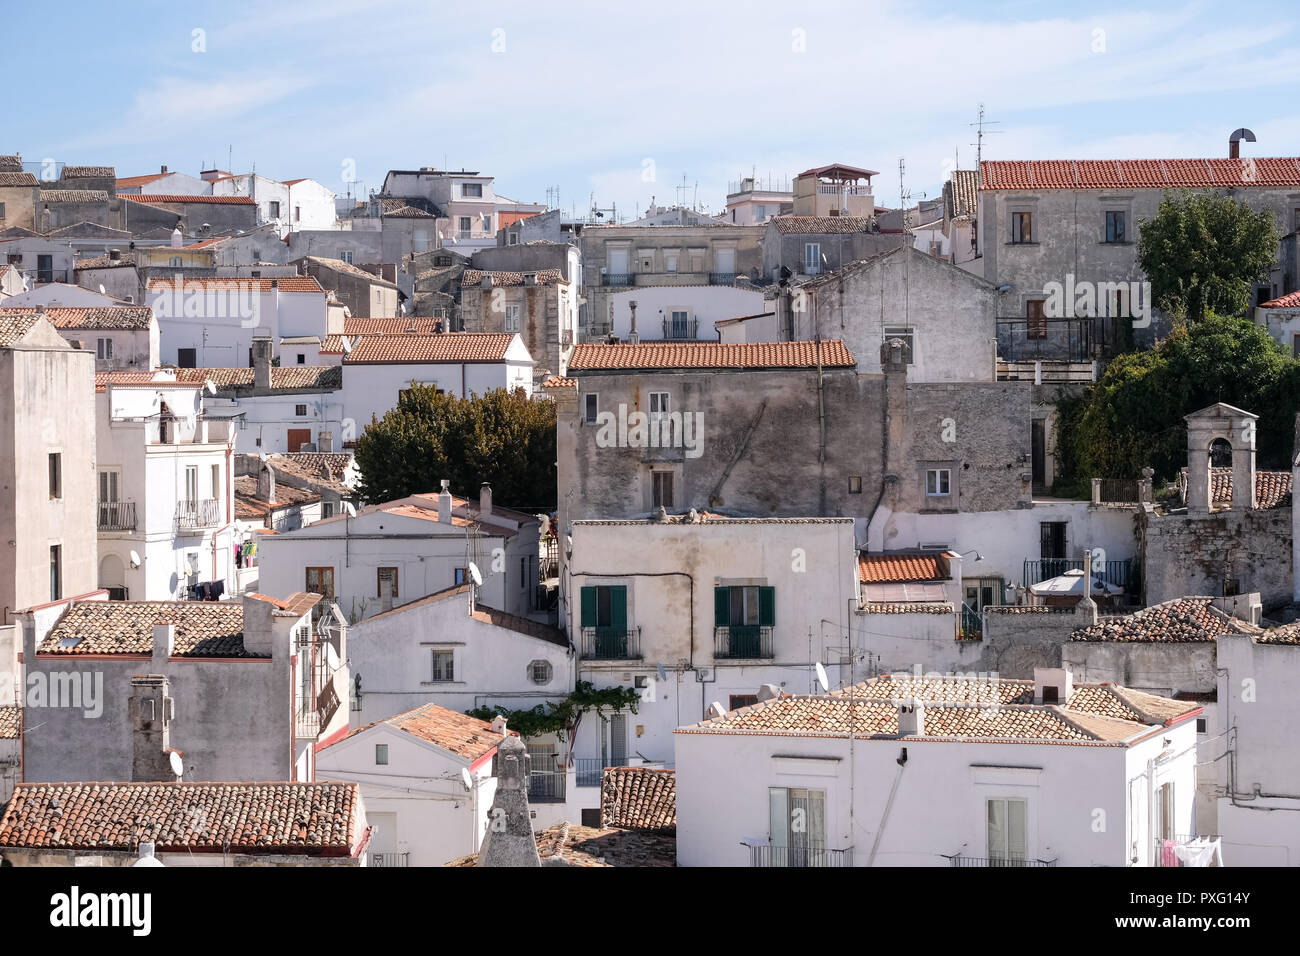 Monte Sant'Angelo, Italy. Roof top scene with red roof tiles in Monte Sant'Angelo, hilltop town in Puglia, southern Italy. Stock Photo